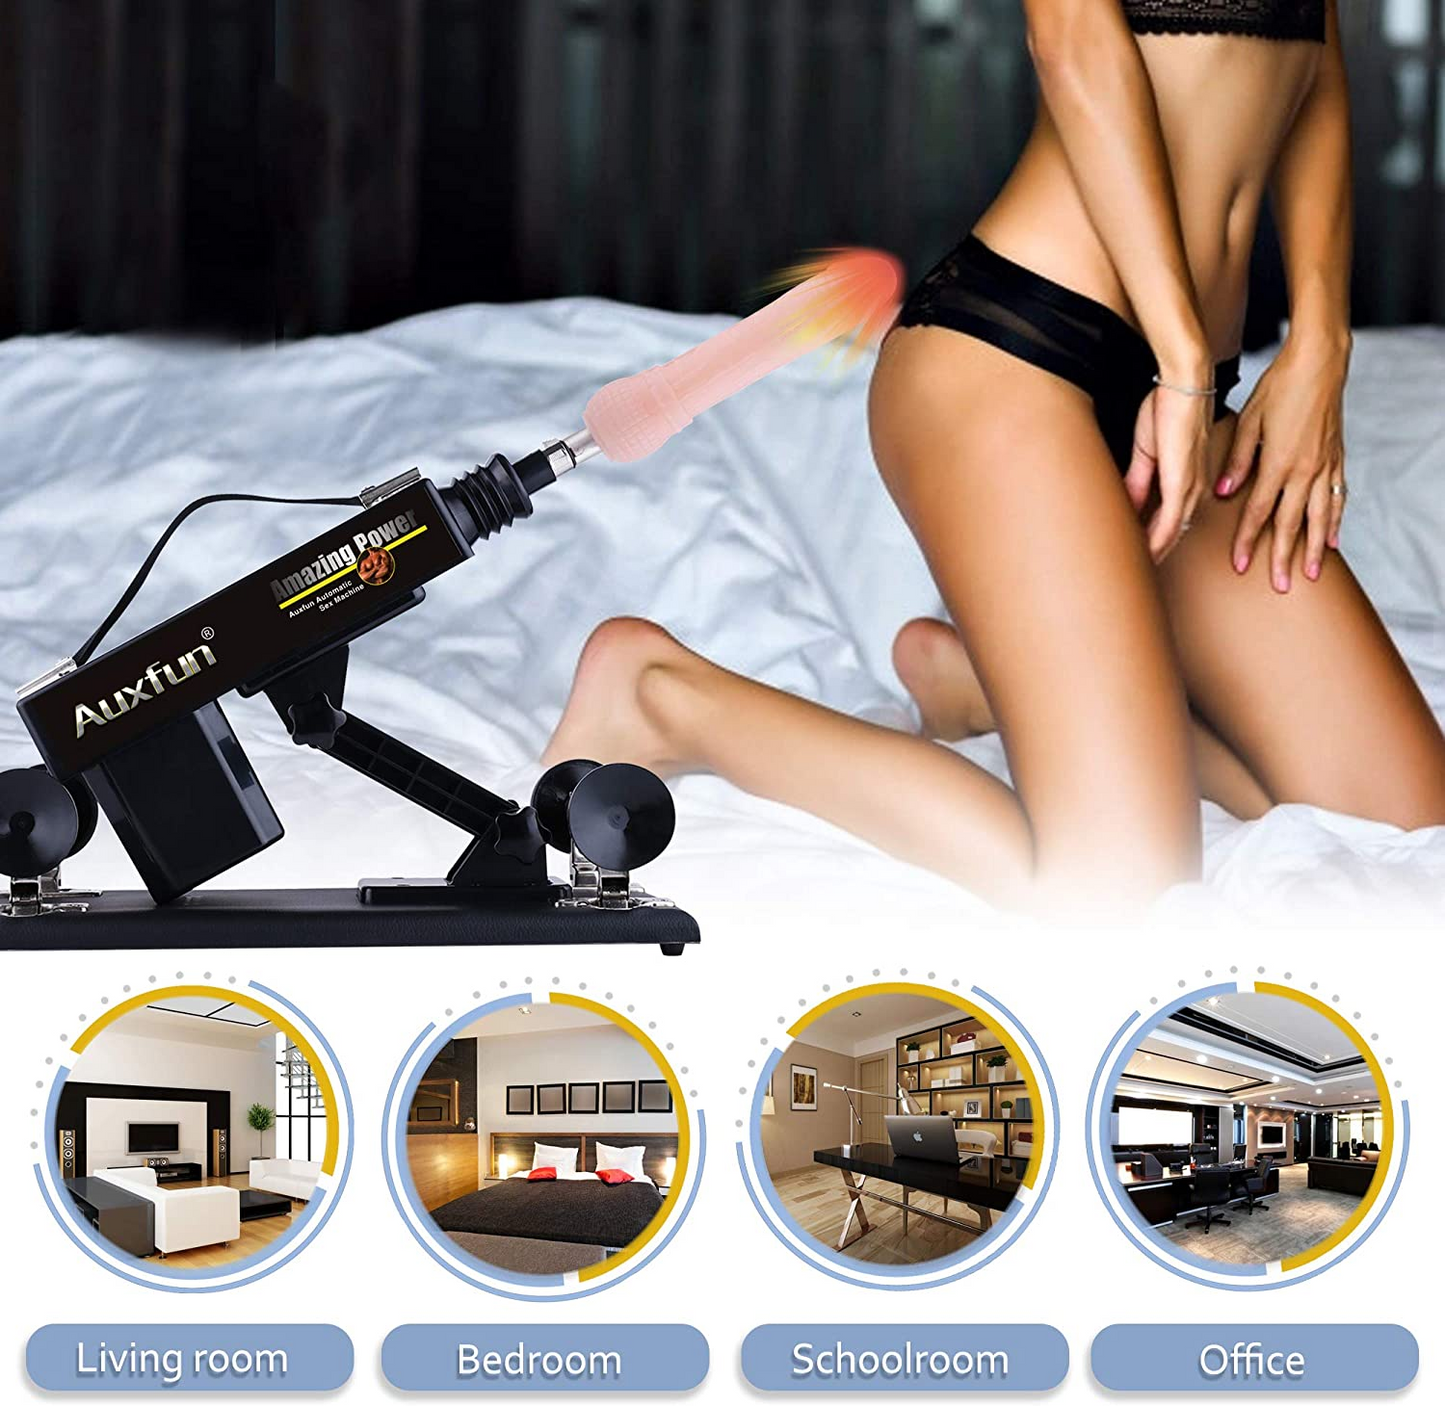 Auxfun® BASIC Sex Machine Package Koen K Sex Furniture With many EXTRAS